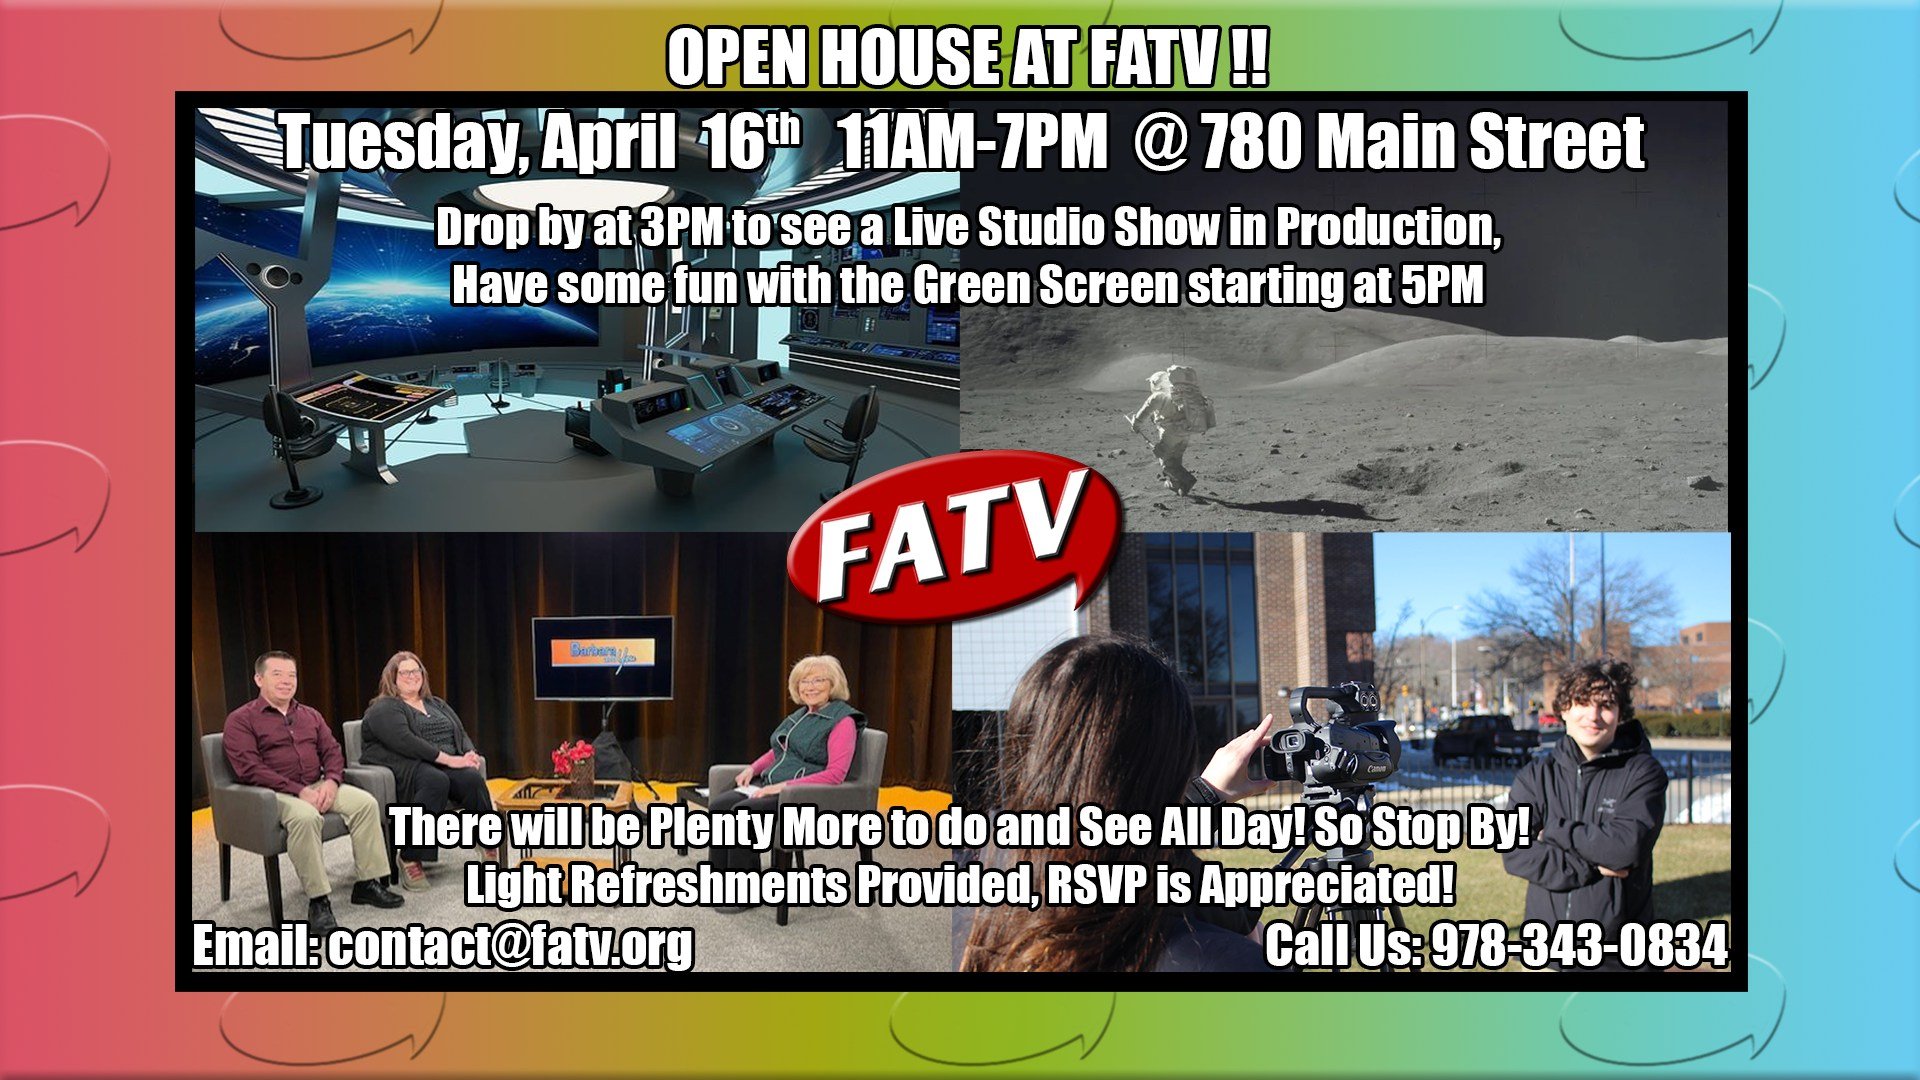 On Tuesday, April 16th, FATV is hosting an open house! Drop in anytime from 11AM to 7PM to tour our community media center. Watch a LIVE studio taping of the &ldquo;Barbara and You&rdquo; show starting at 3PM. Come on by at 5PM to take a ride on a st